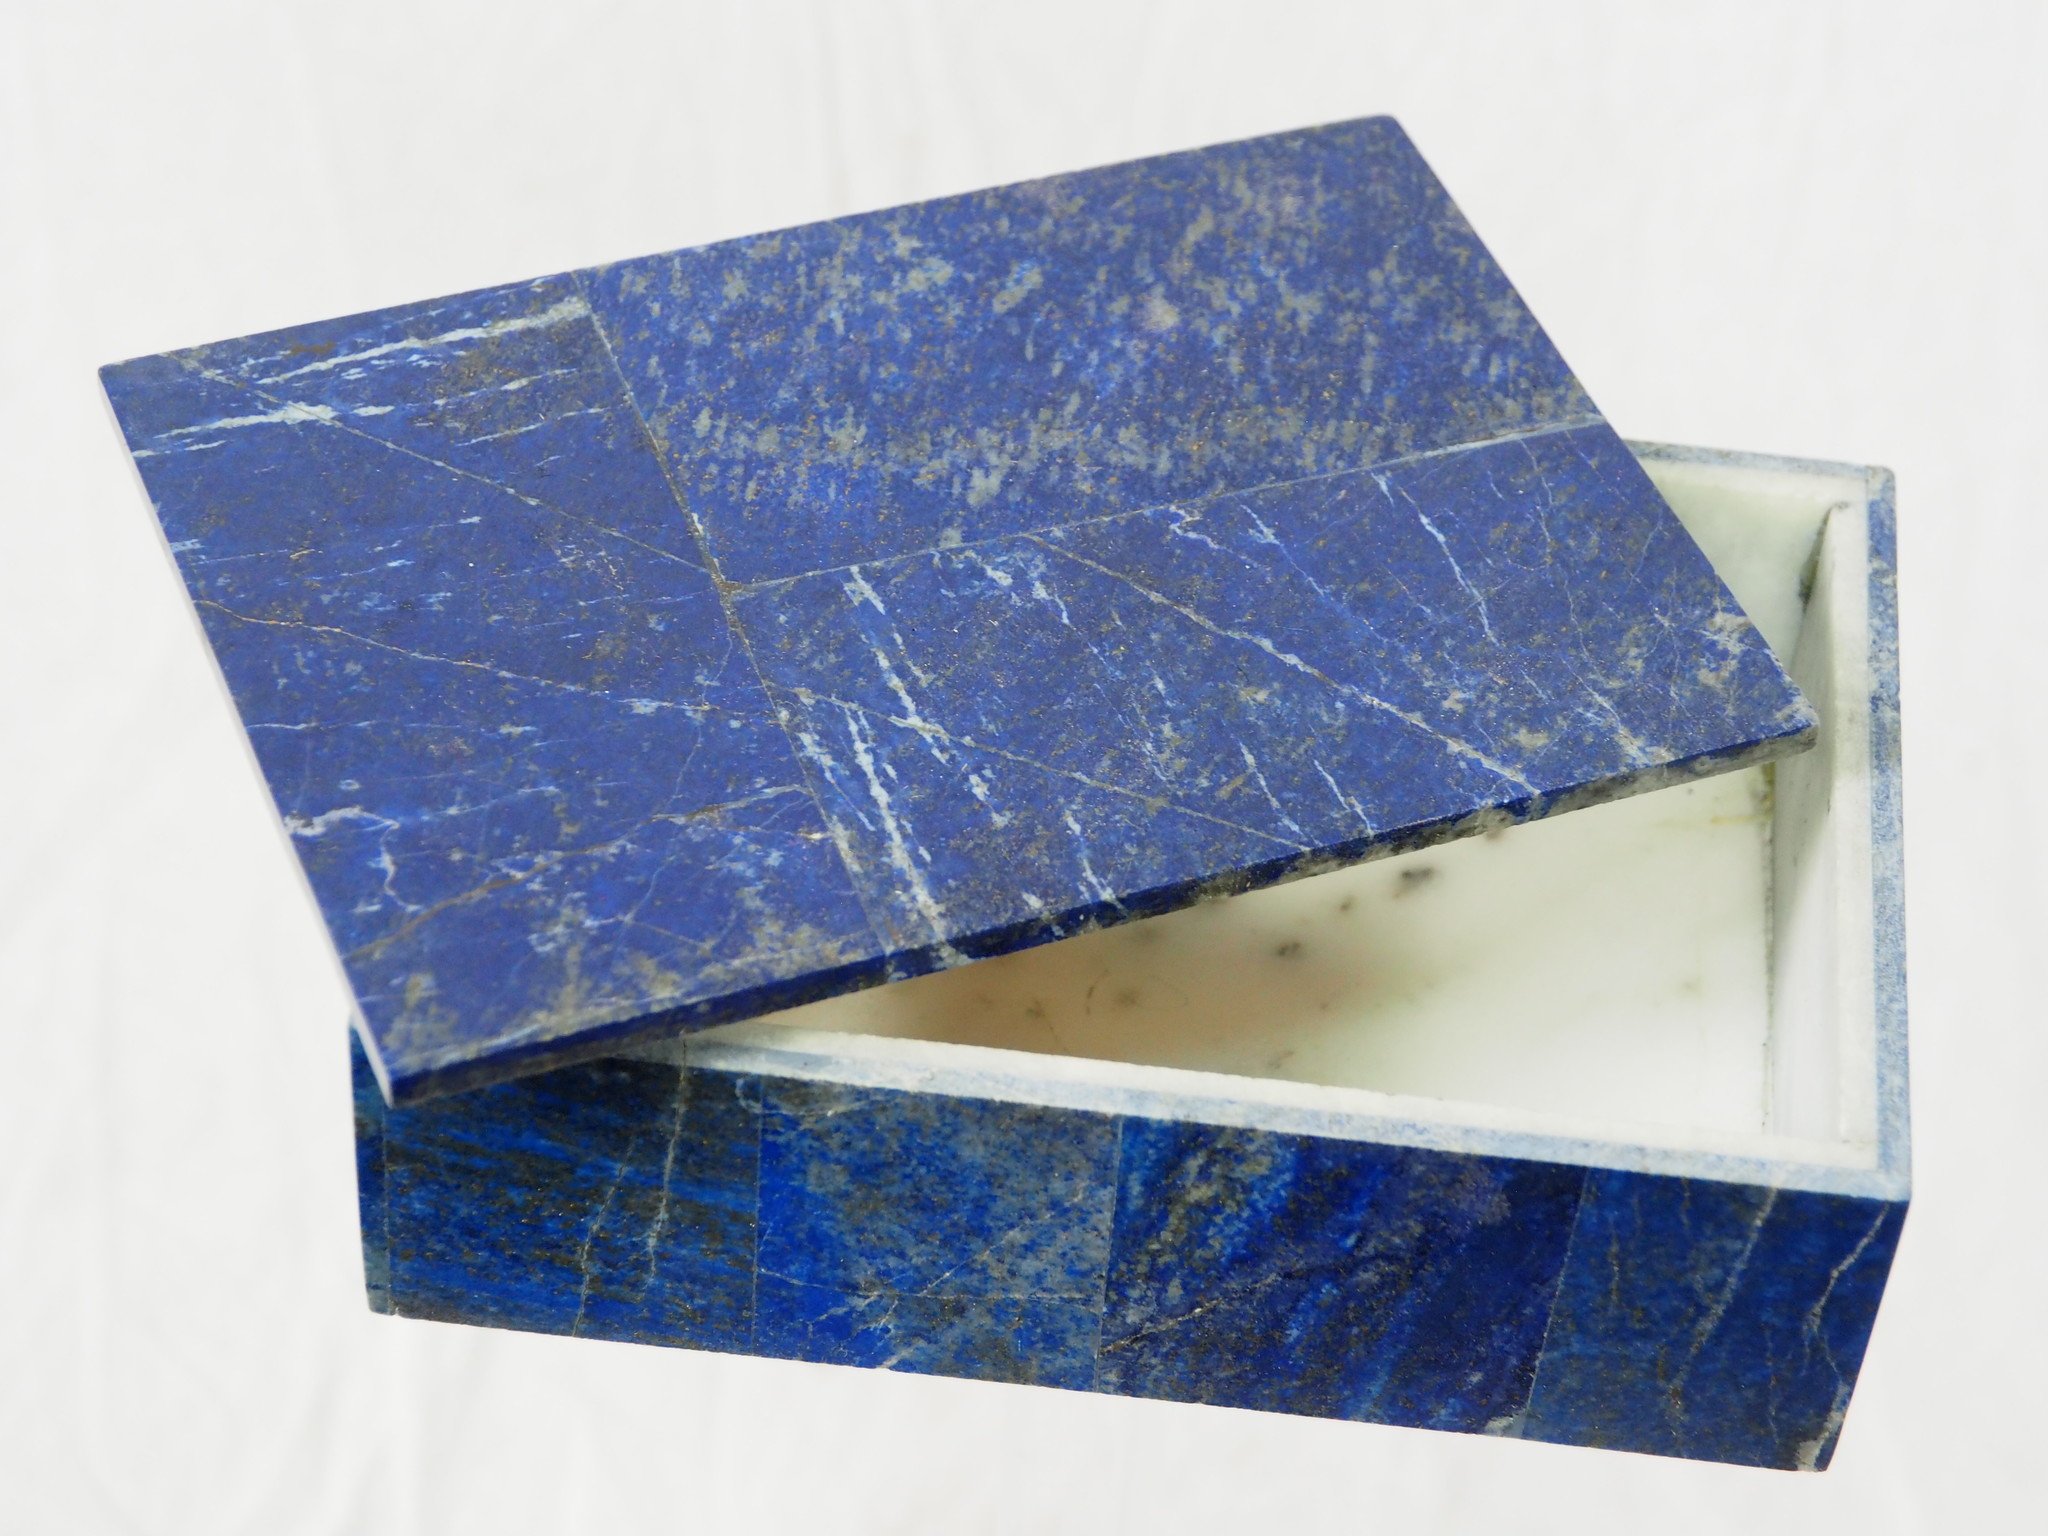 Hand Crafted stunning genuine Afghan Lapis Lazuli Gemstone  Box   from Afghanistan No:21/D